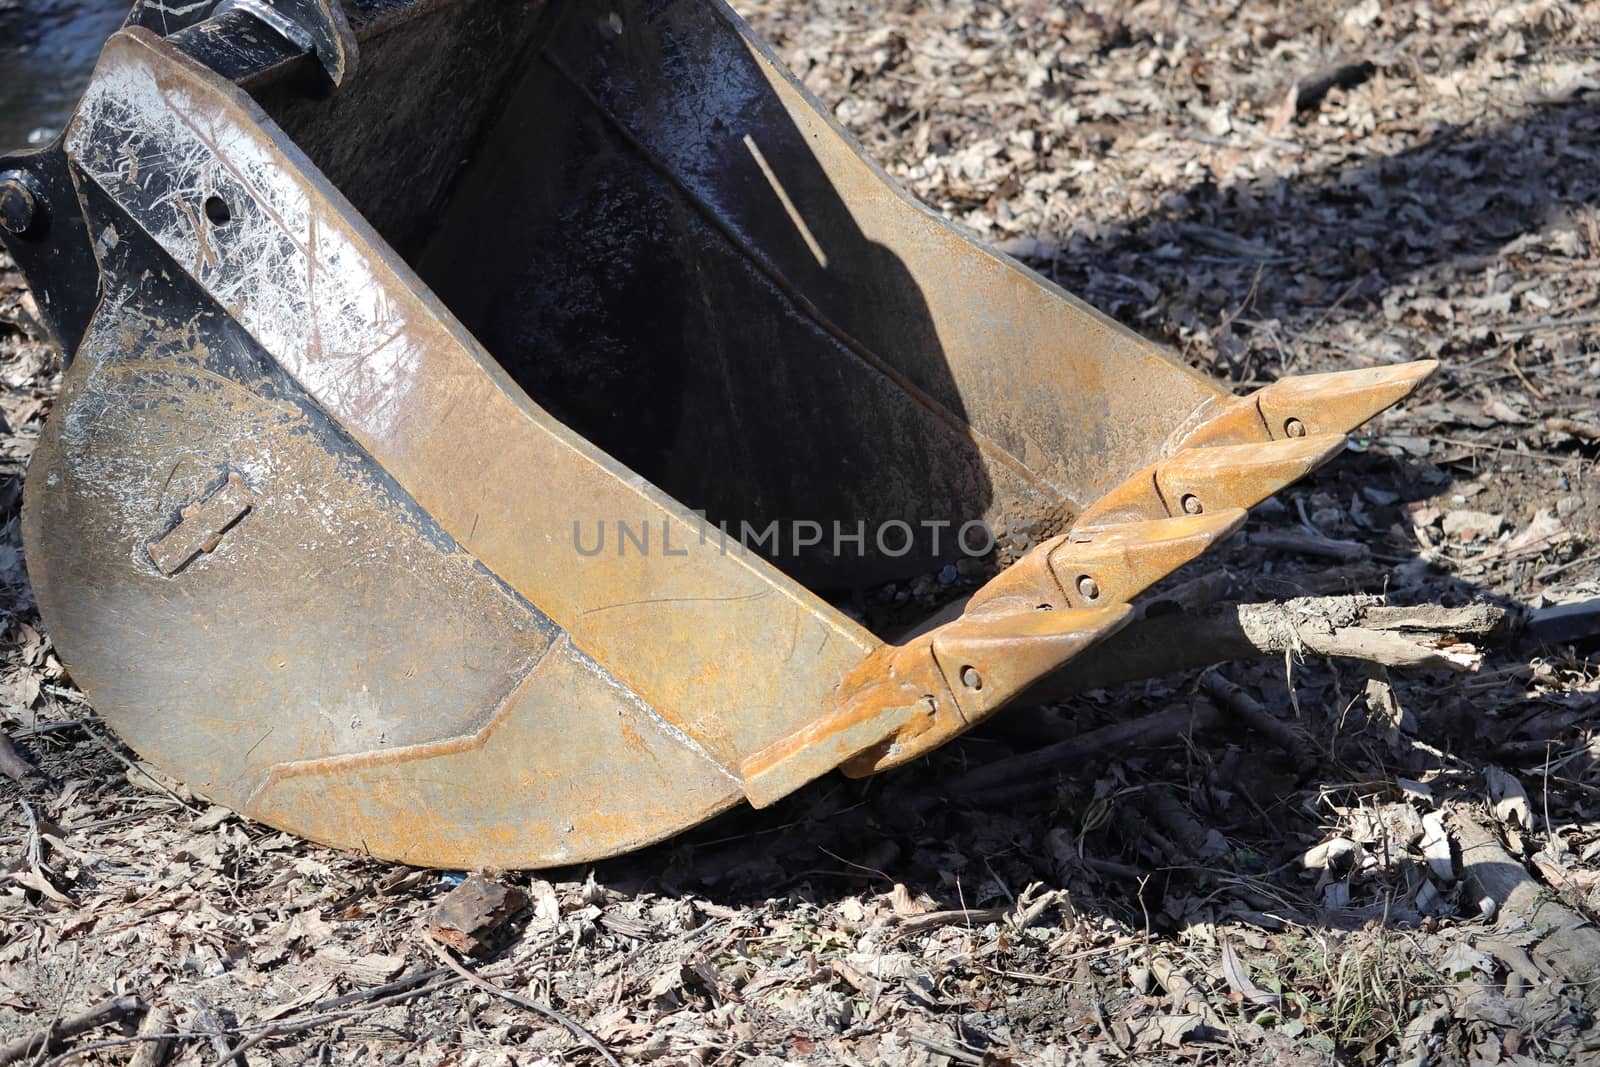 The rusty metal bucket, or shovel, of an excavator is detached from the machine and sitting on the ground, which is covered in dirty leaves and debris.